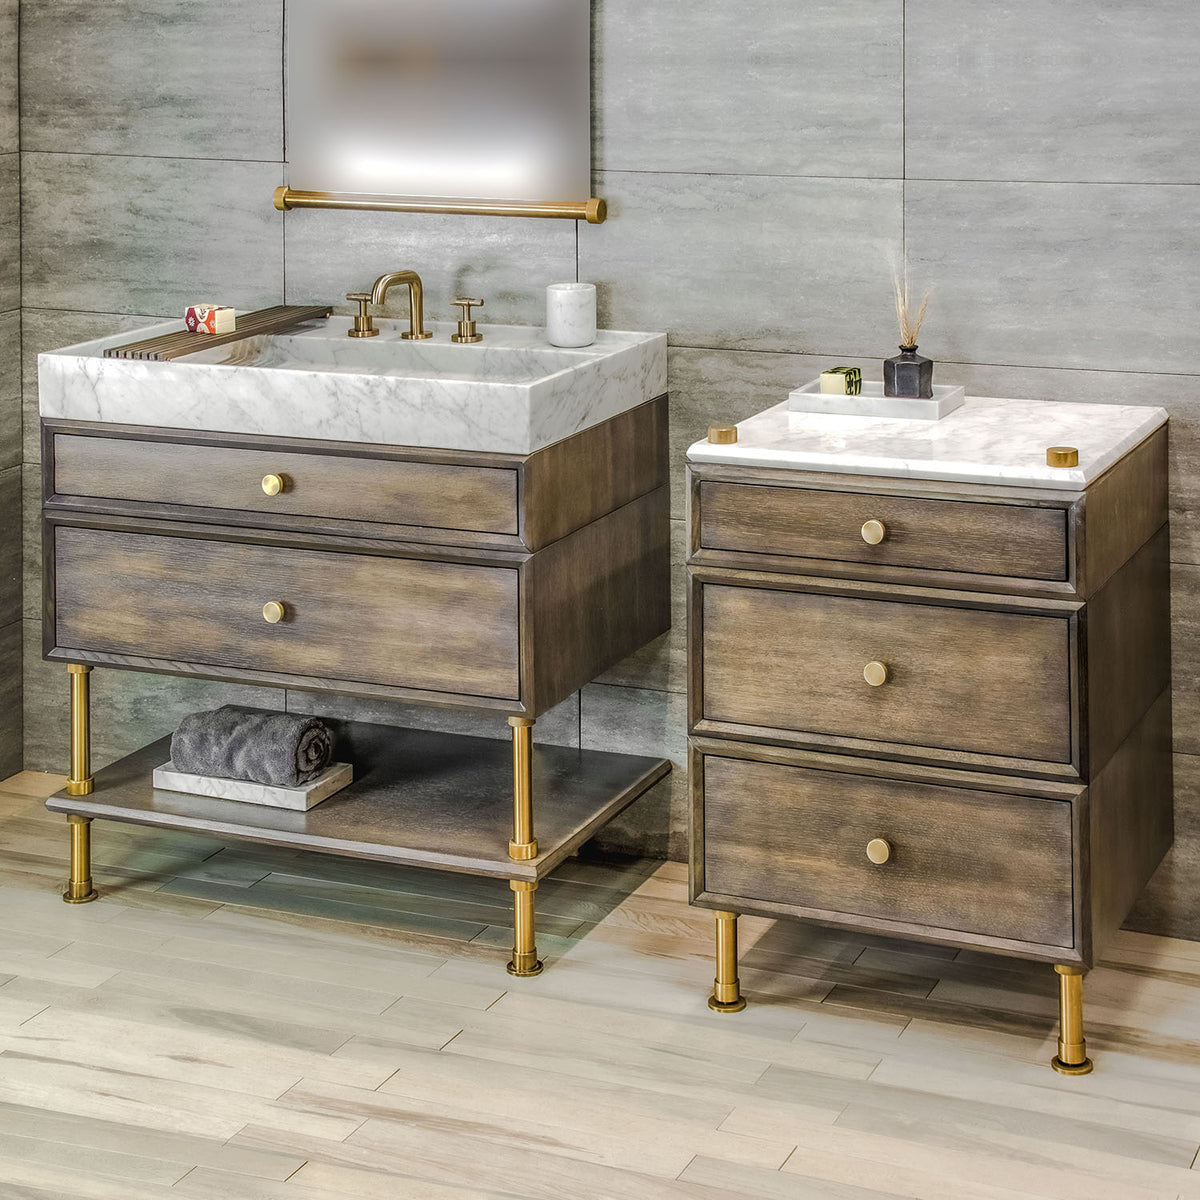 Stone Forest Elemental Classic Side Table in aged brass and carrara marble.  Elemental Classic Vanity with split drawers and Ventus Bathsink. image 1 of 4